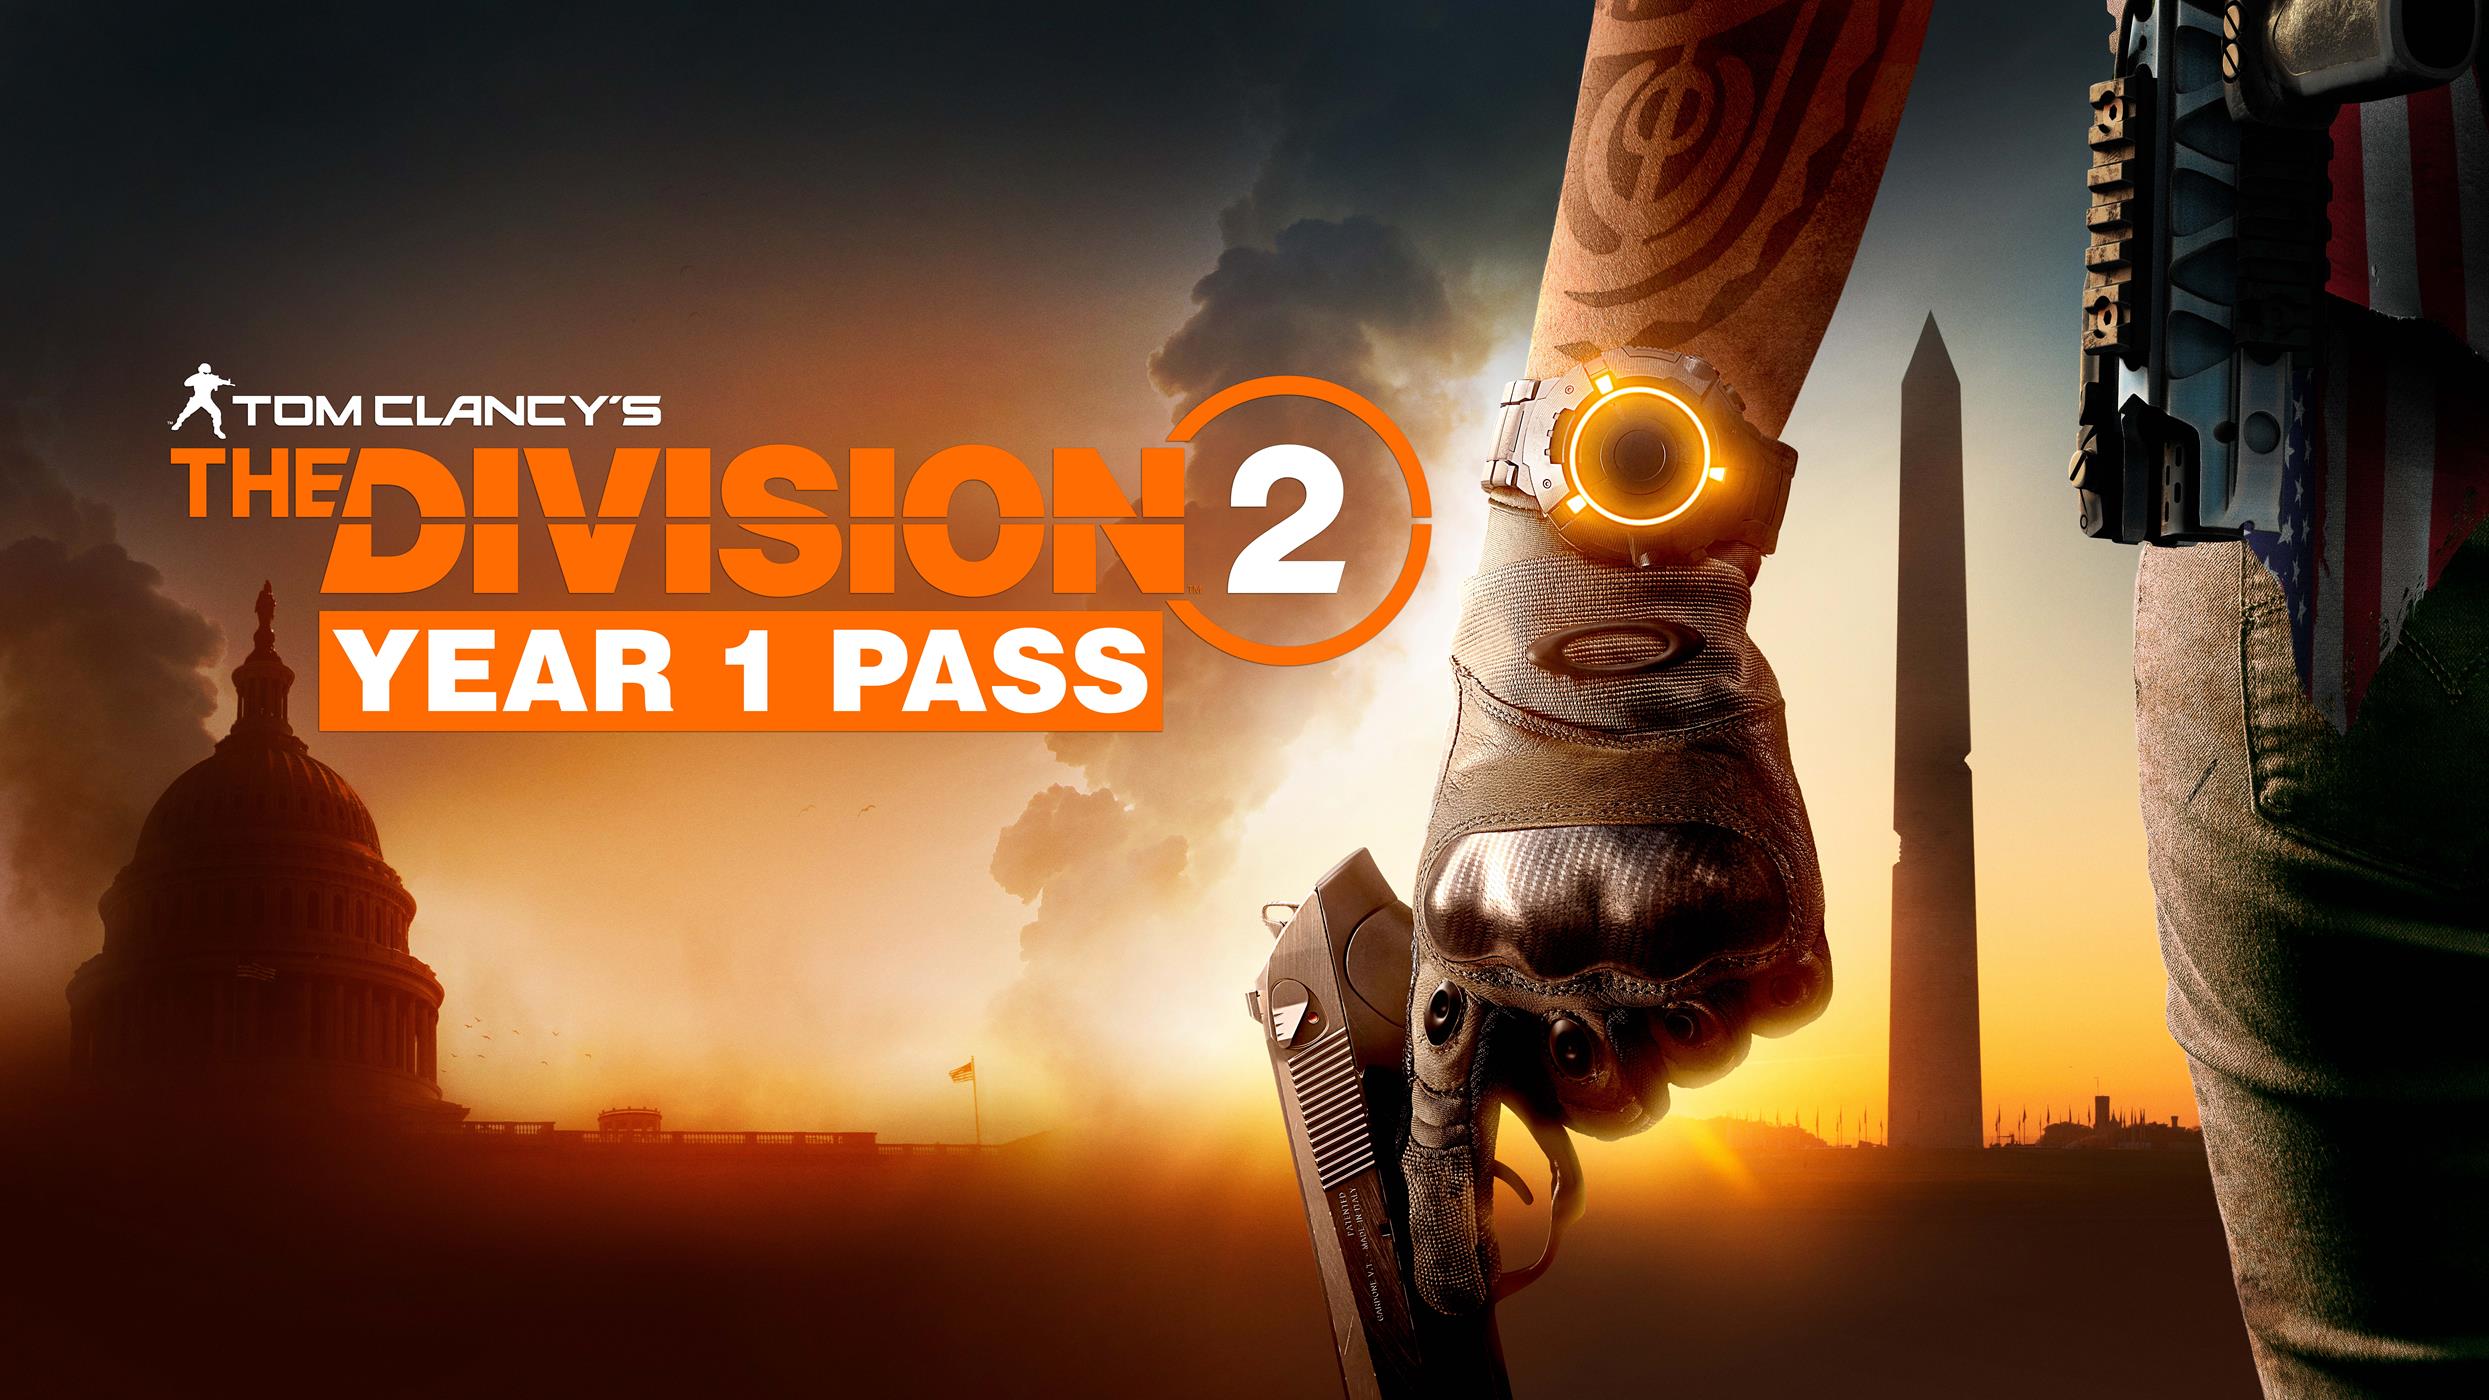 TRUE smid væk fumle The Division 2 Year 1 content: season pass bonuses detailed, loot boxes  confirmed | VG247